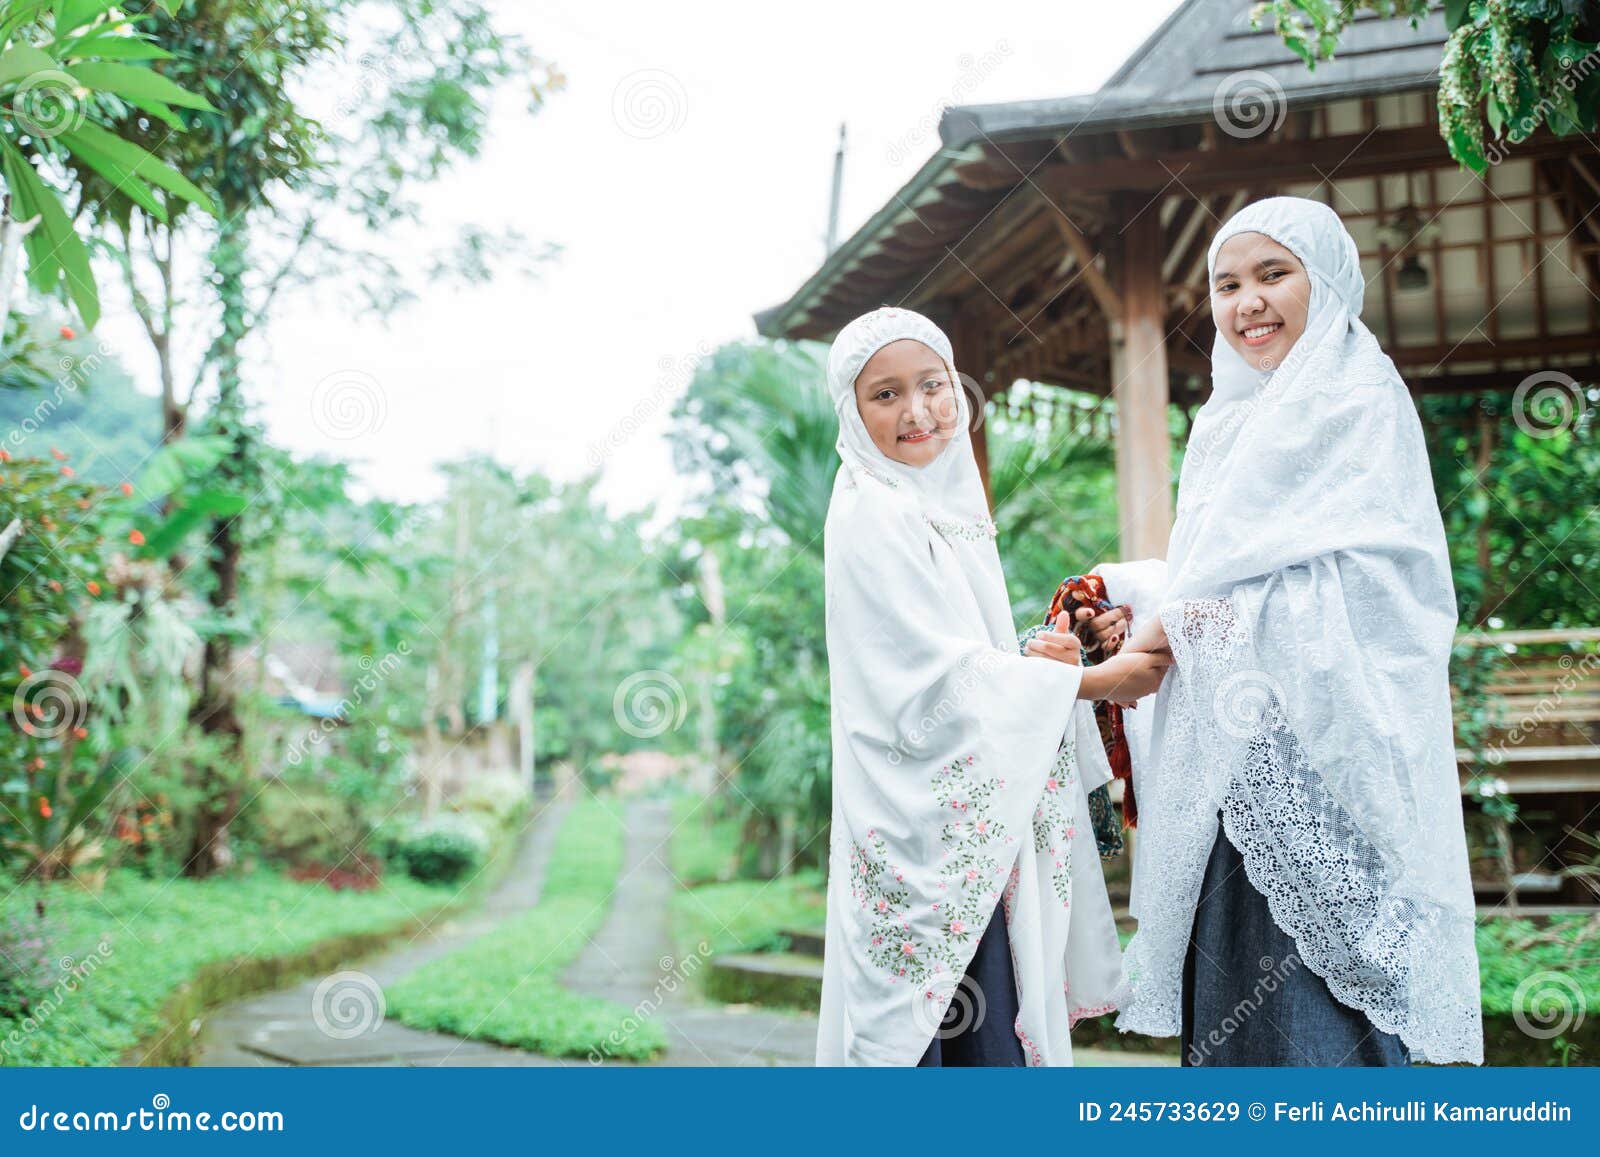 Mother And Daughter With Hijab Walking To The Mosque To Do Idul Fitri Prayer Stock Image Image